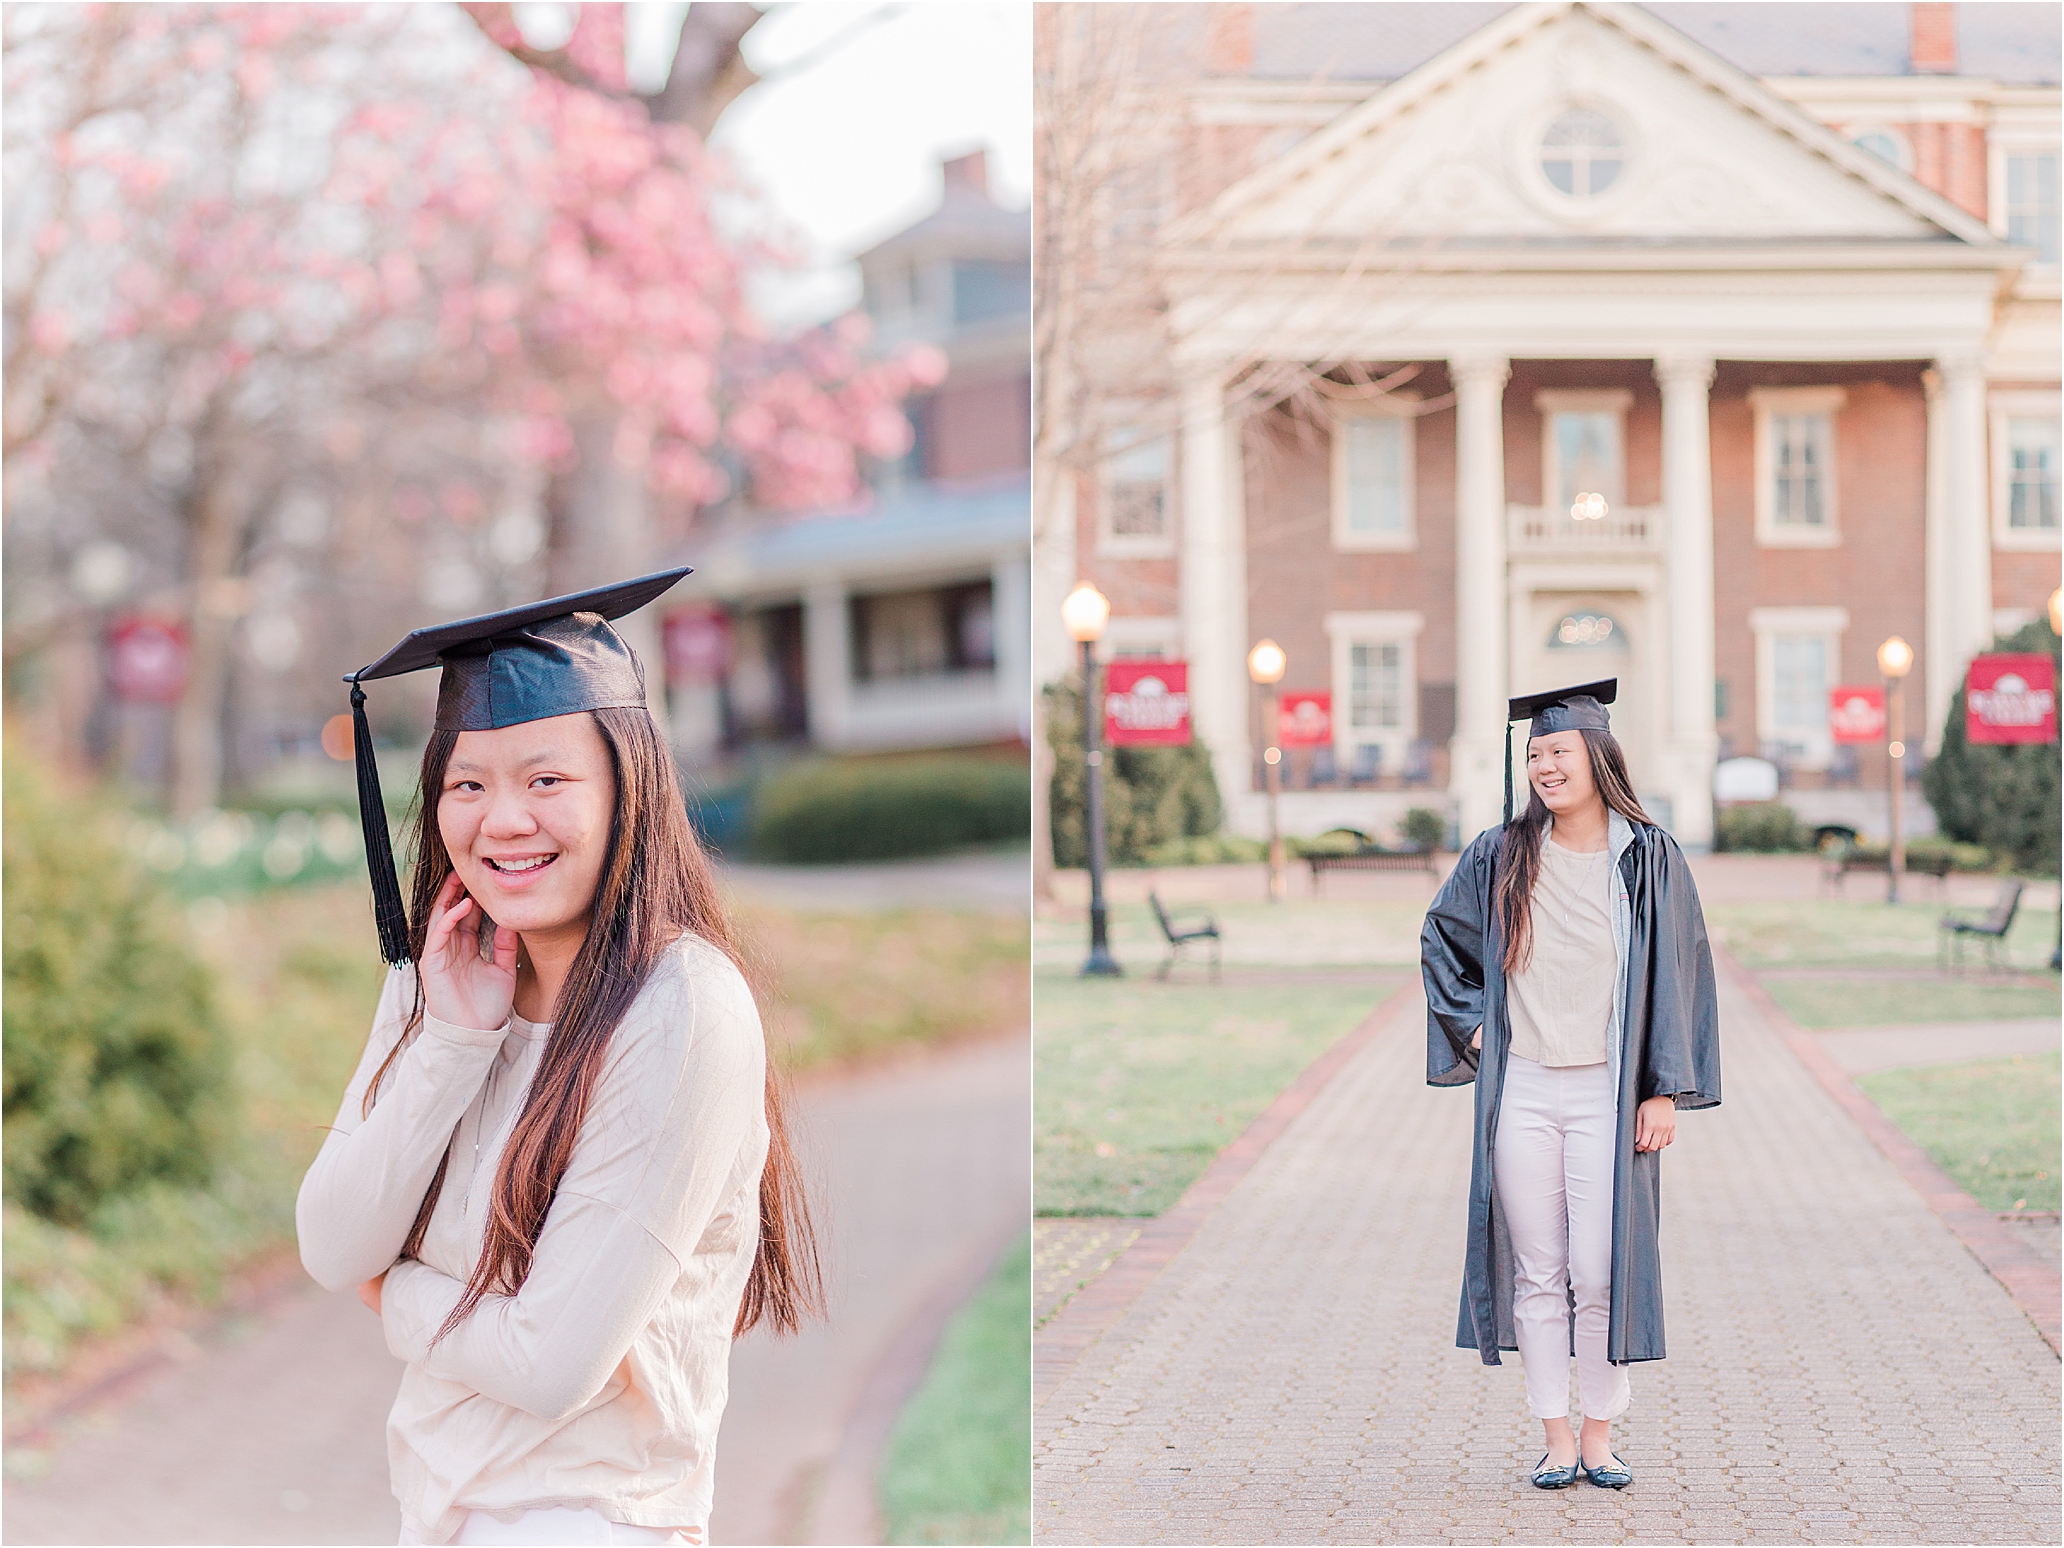 A spring graduation session at Roanoke College.